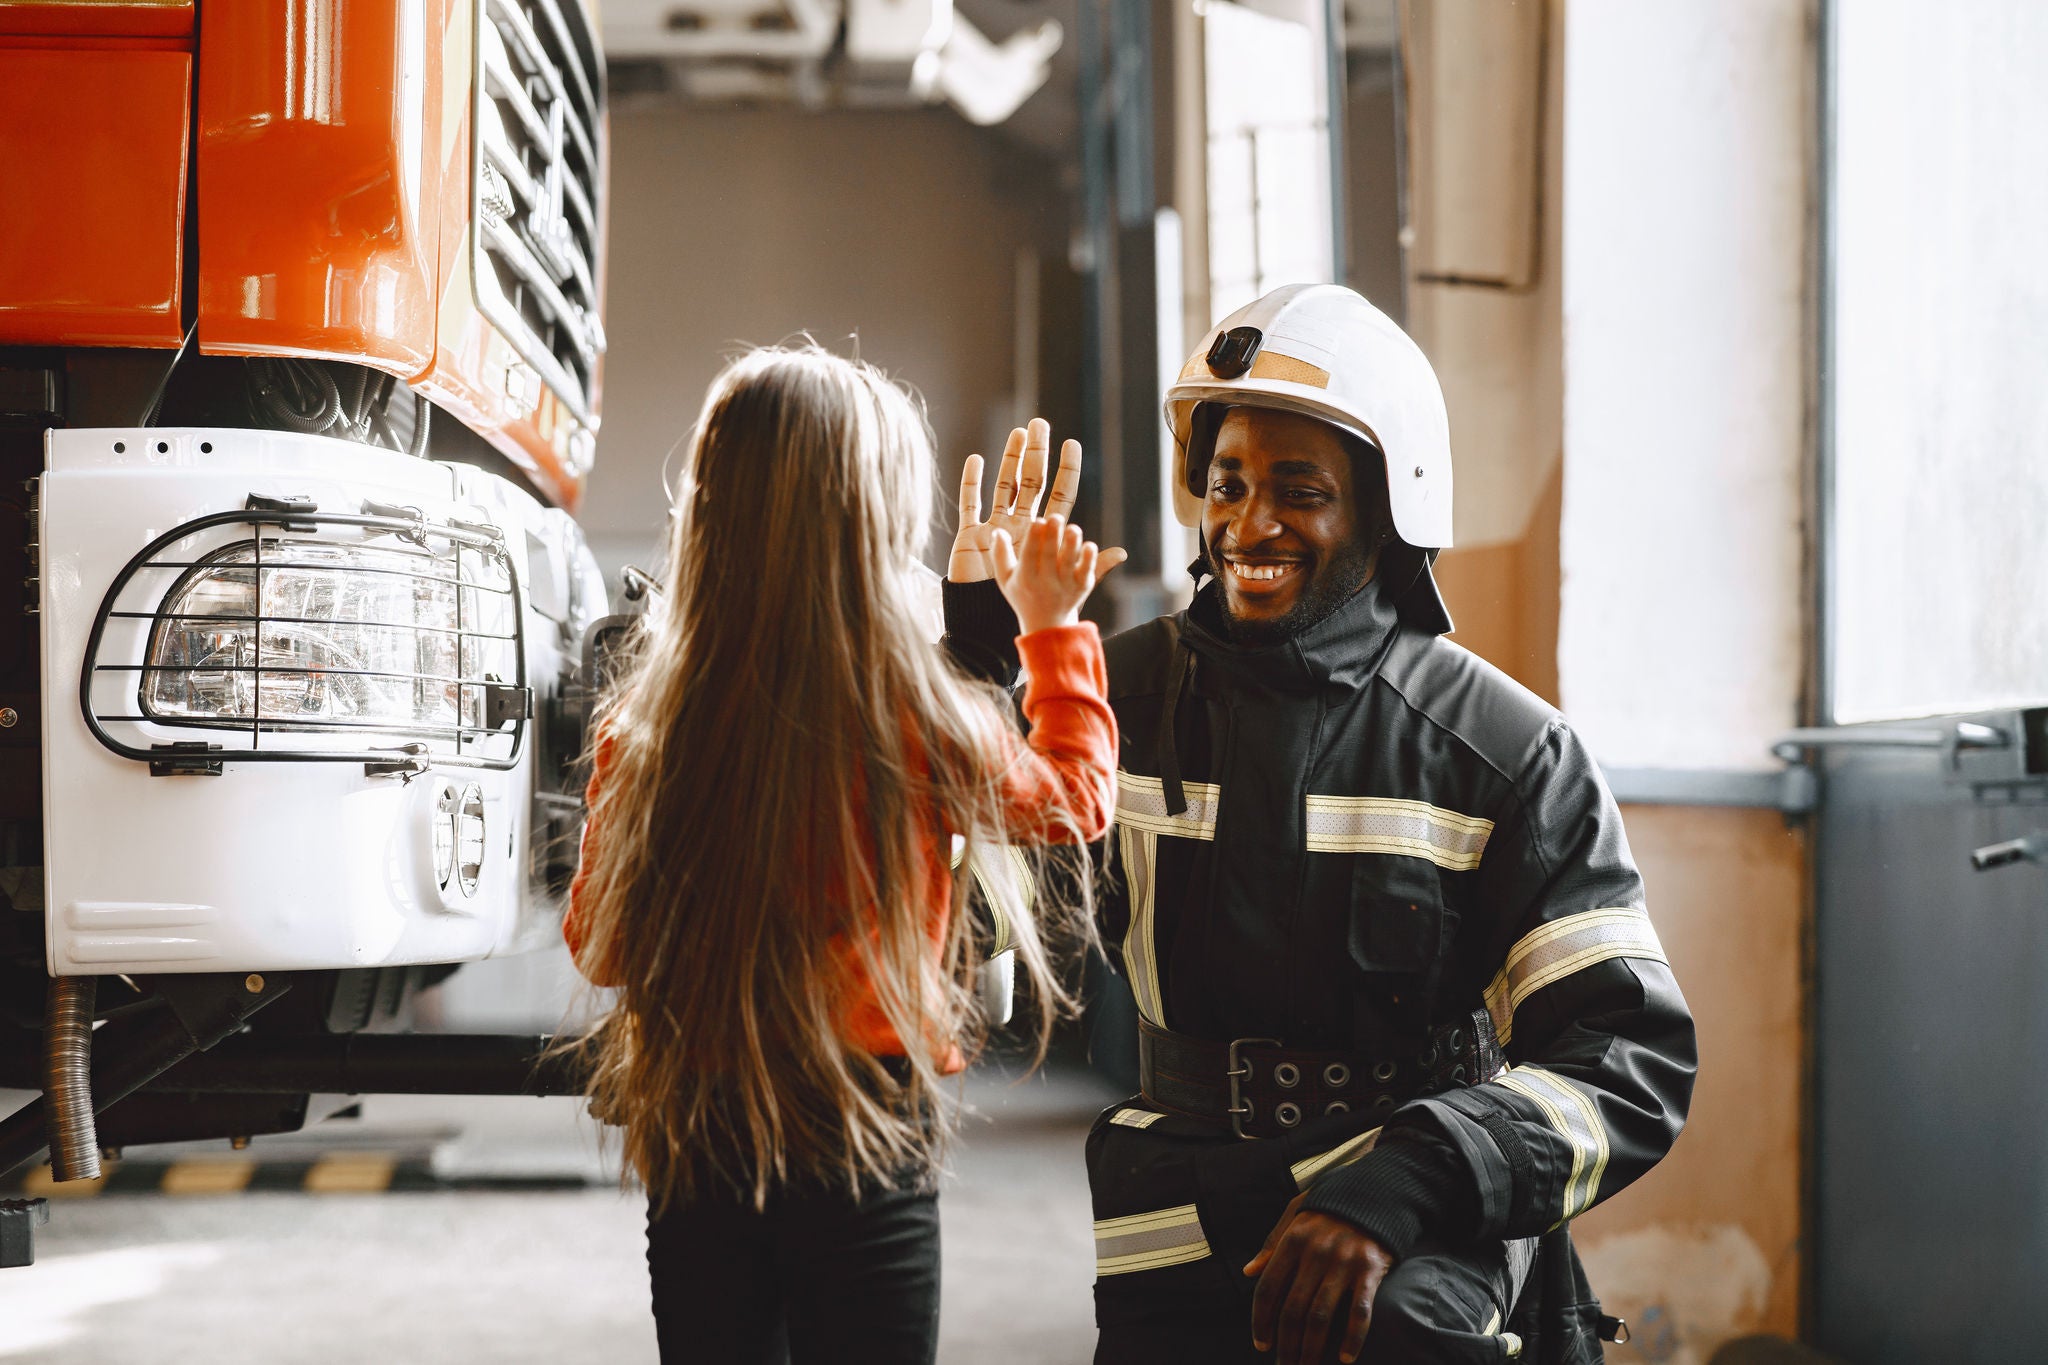 Fire fighter giving youg girl a high-five